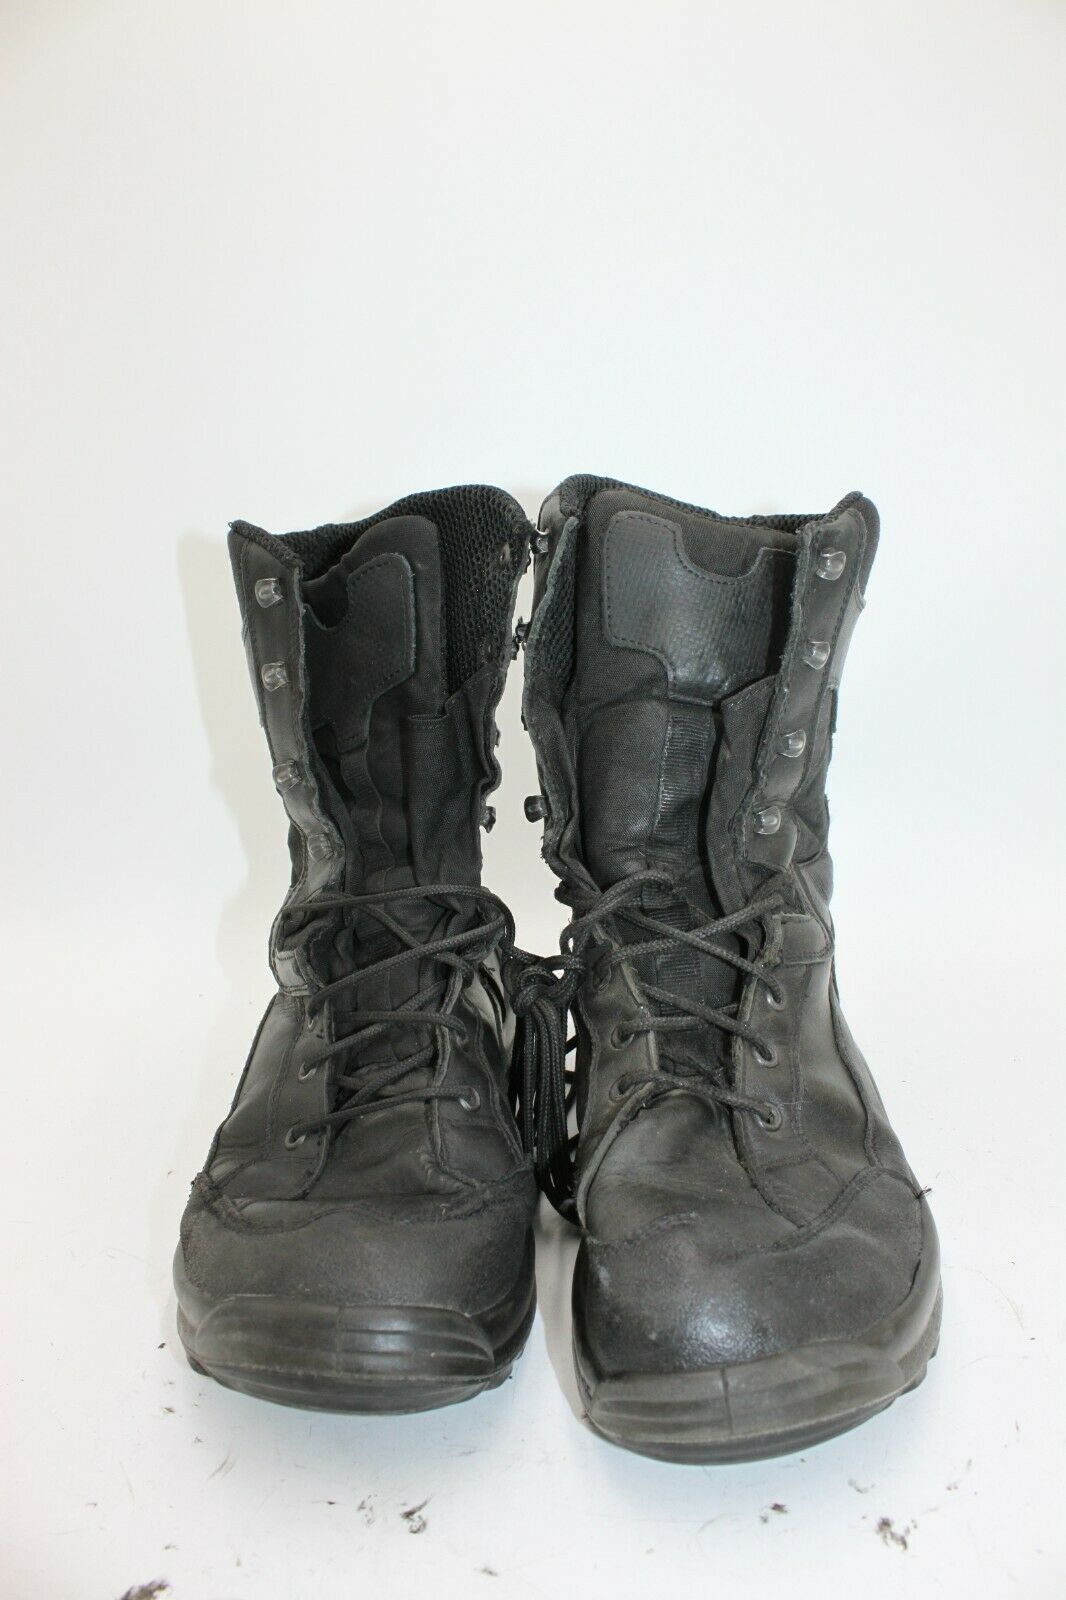 Austrian Military Jungle Combat Boots Stumpp & Baier Used Size 11.5 US (ASB4745115)